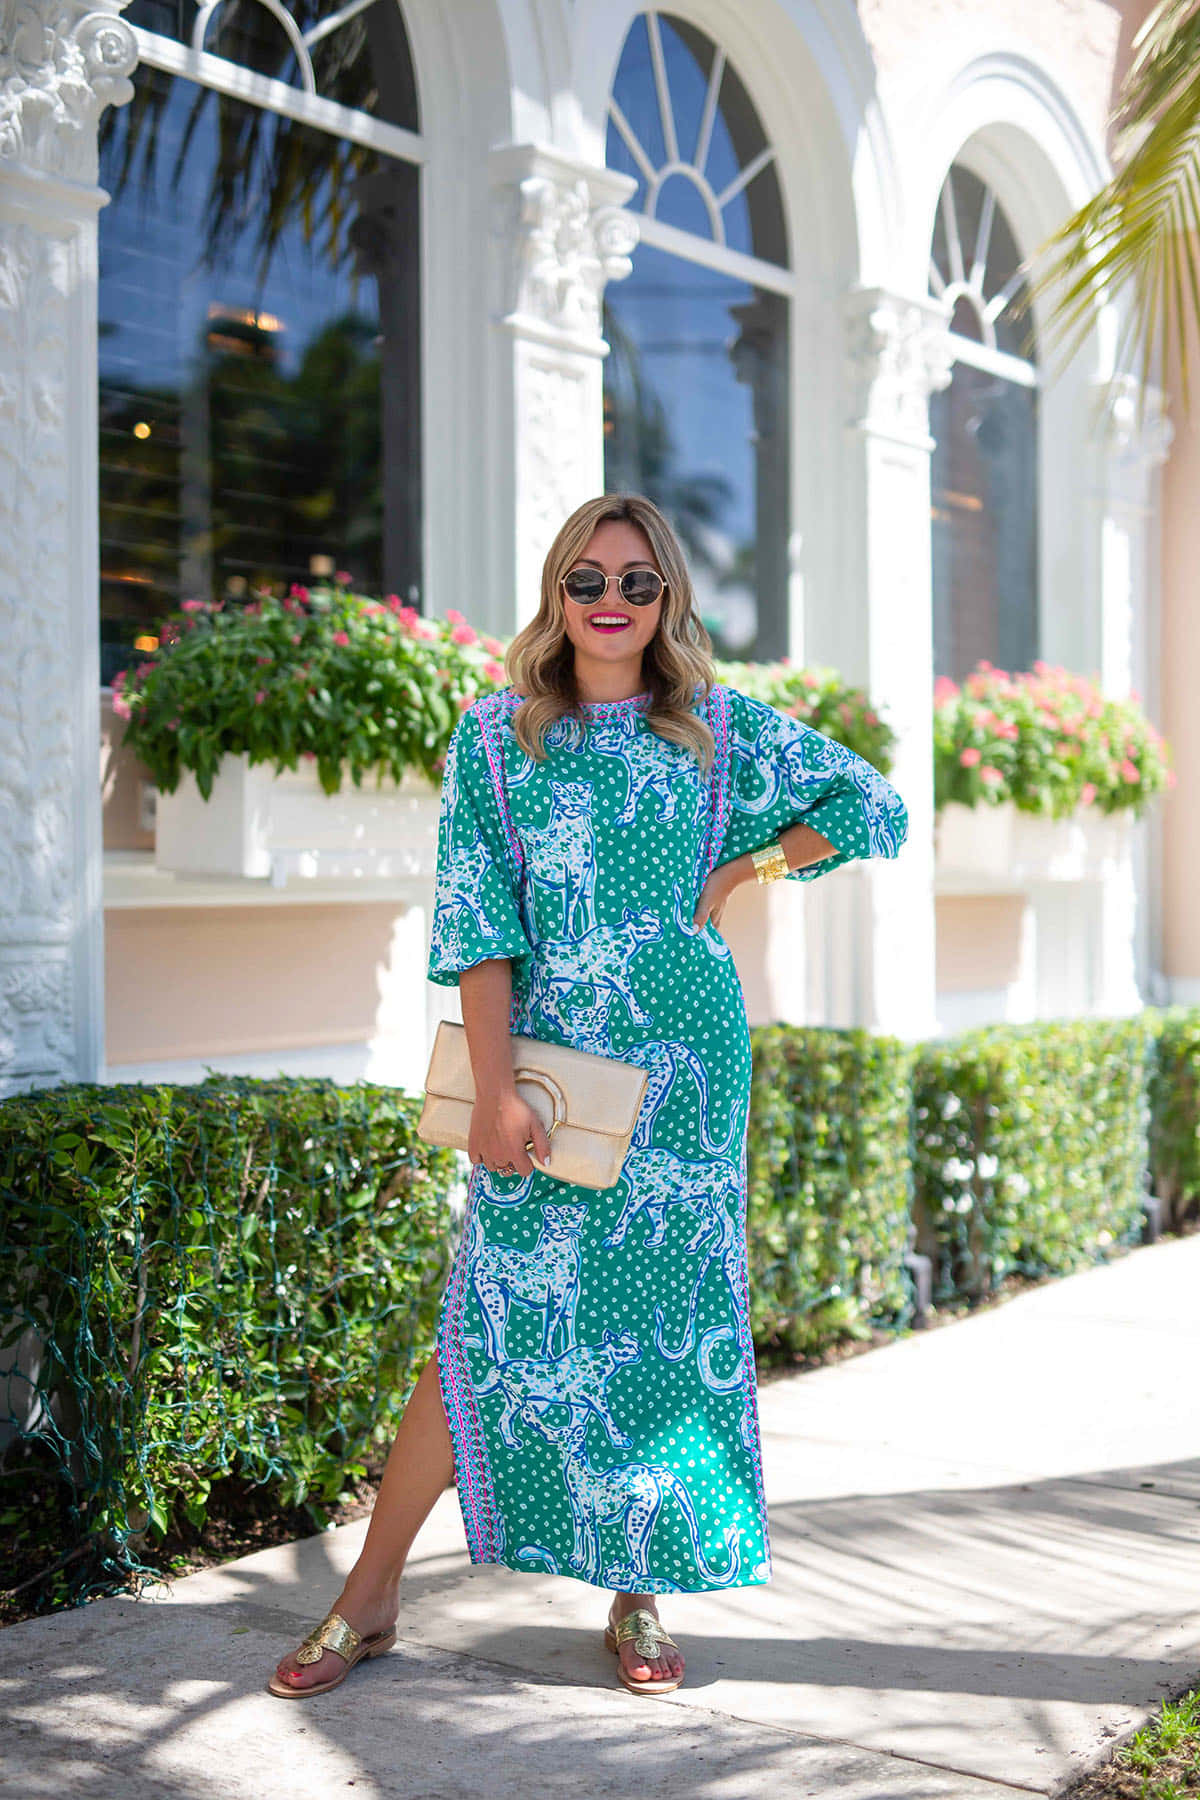 Embrace the vibrant colors and prints of Lilly Pulitzer